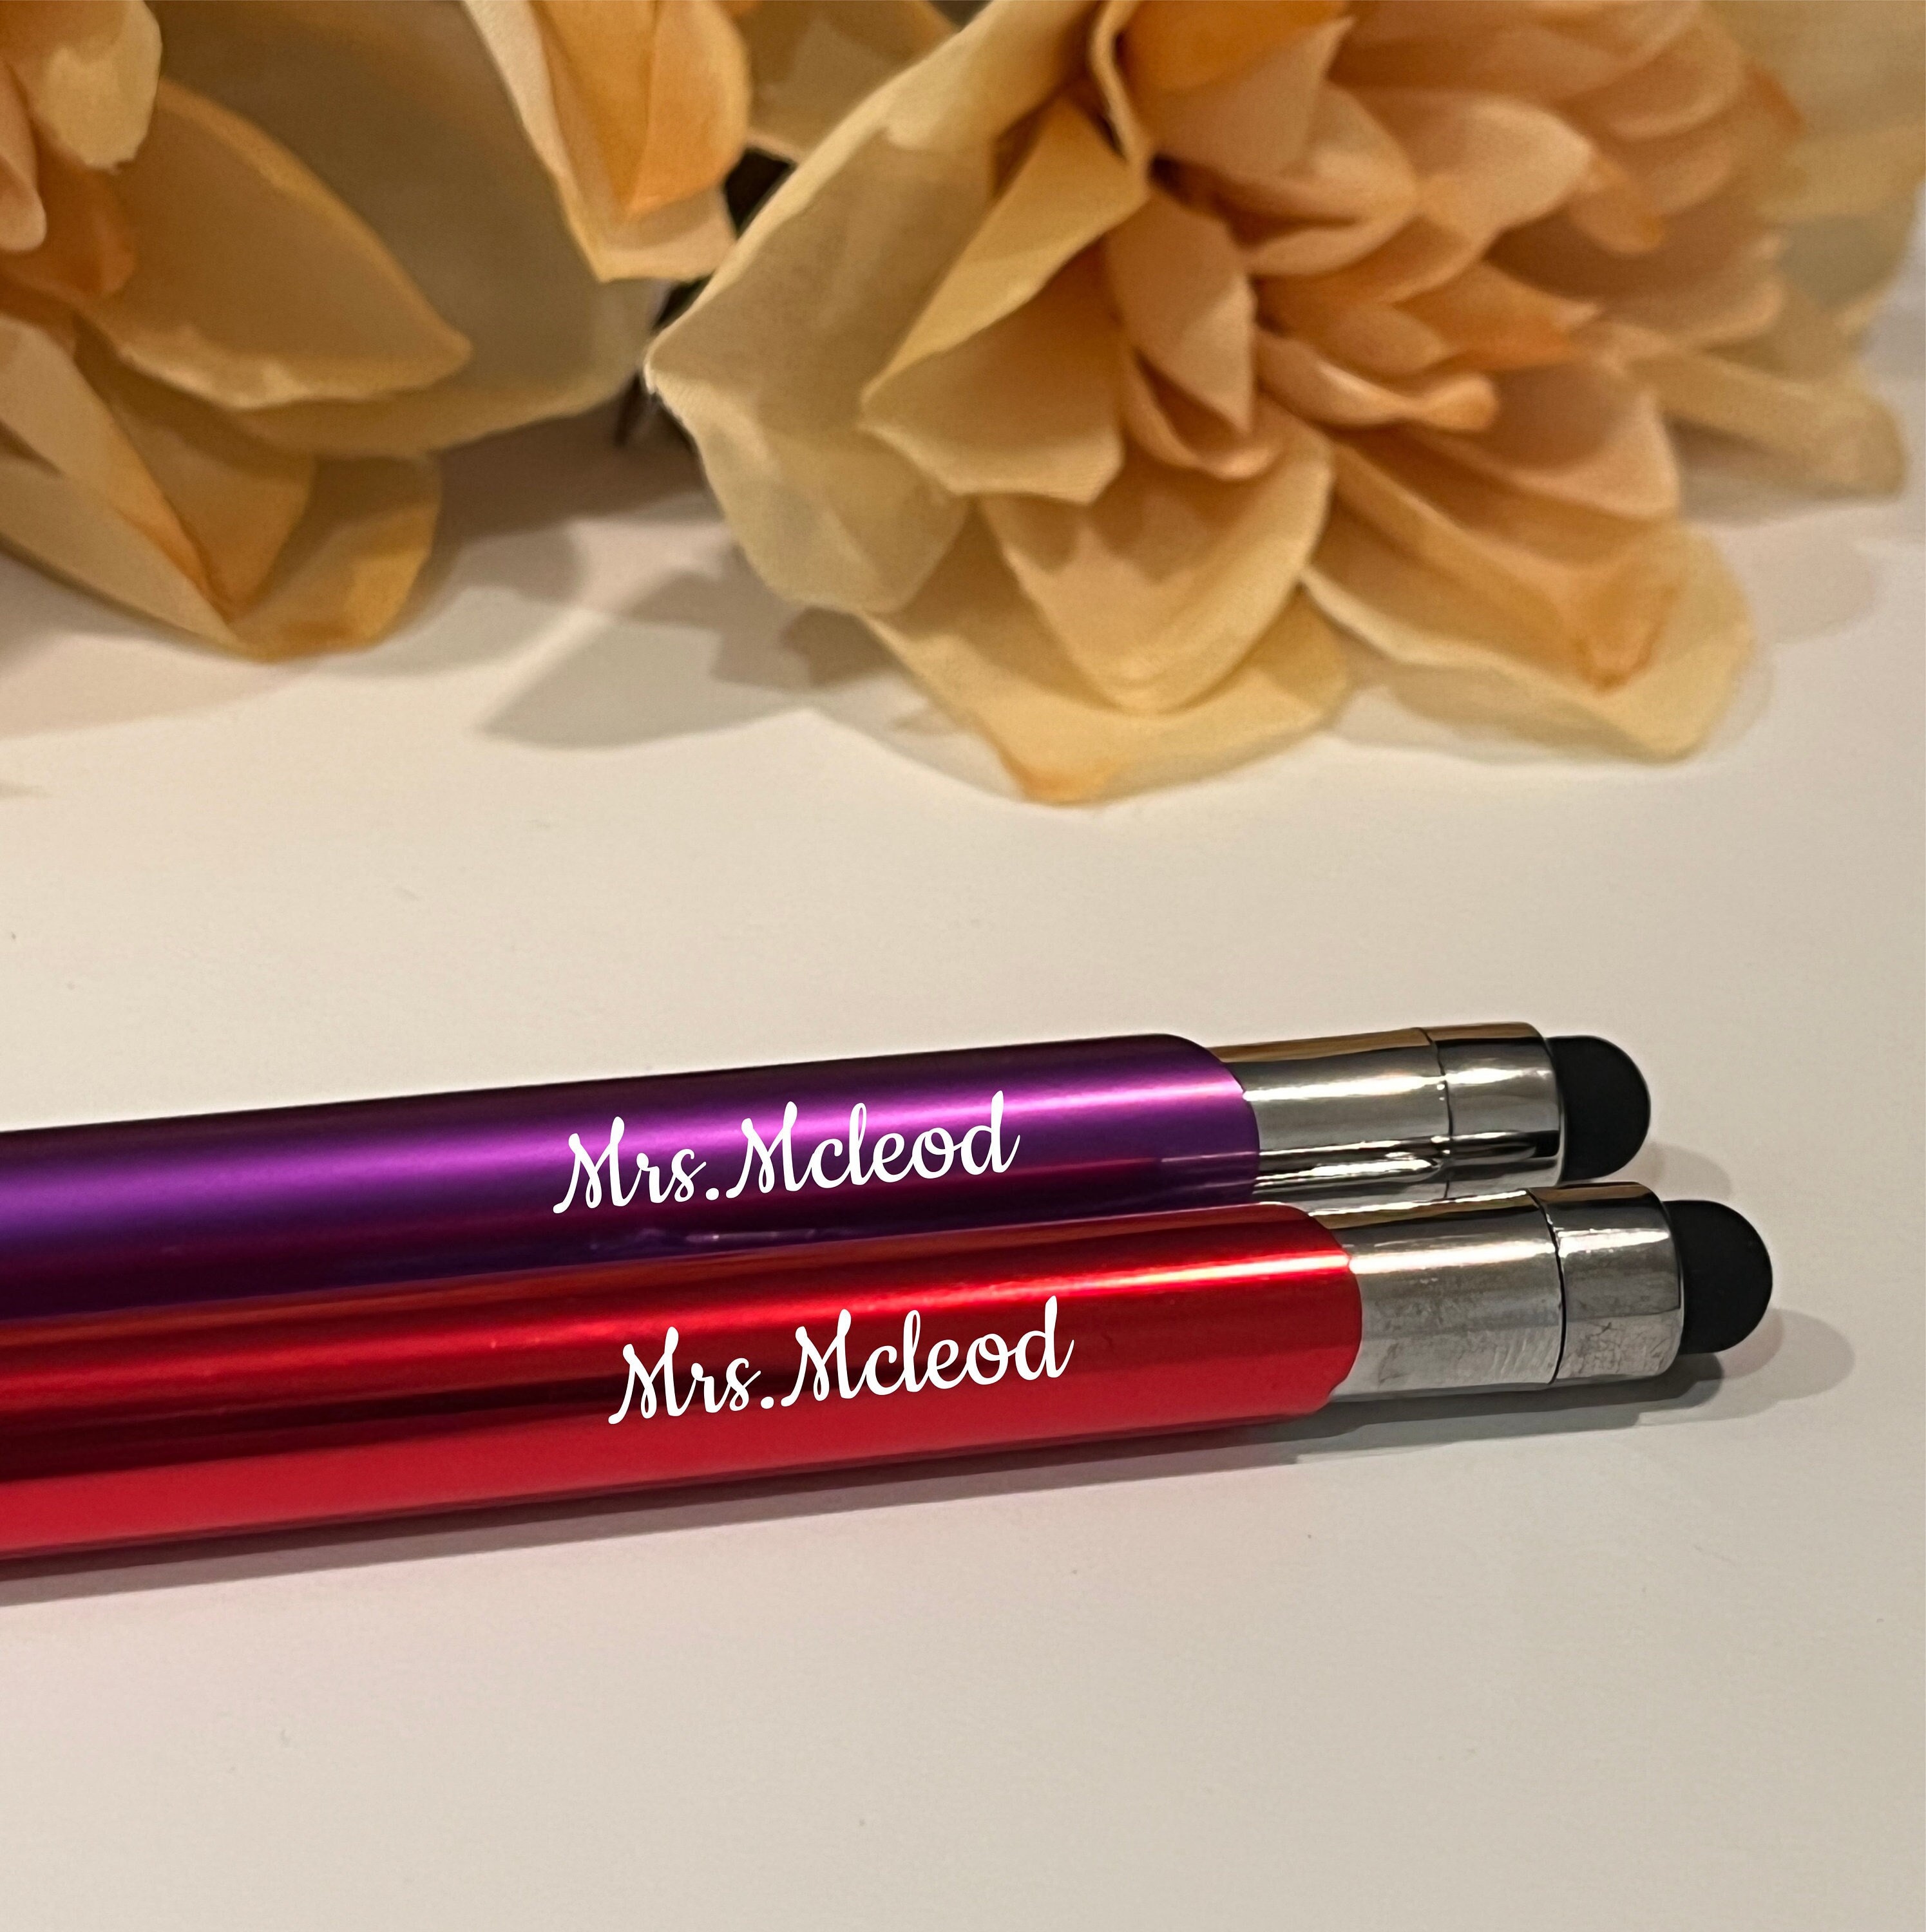 Personalized Crystal Prism Pens with Stylus - Metal Gem Pen - Custom  Metallic Printed Name Pens with Black Ink - Imprinted with Message, Pens  for Women